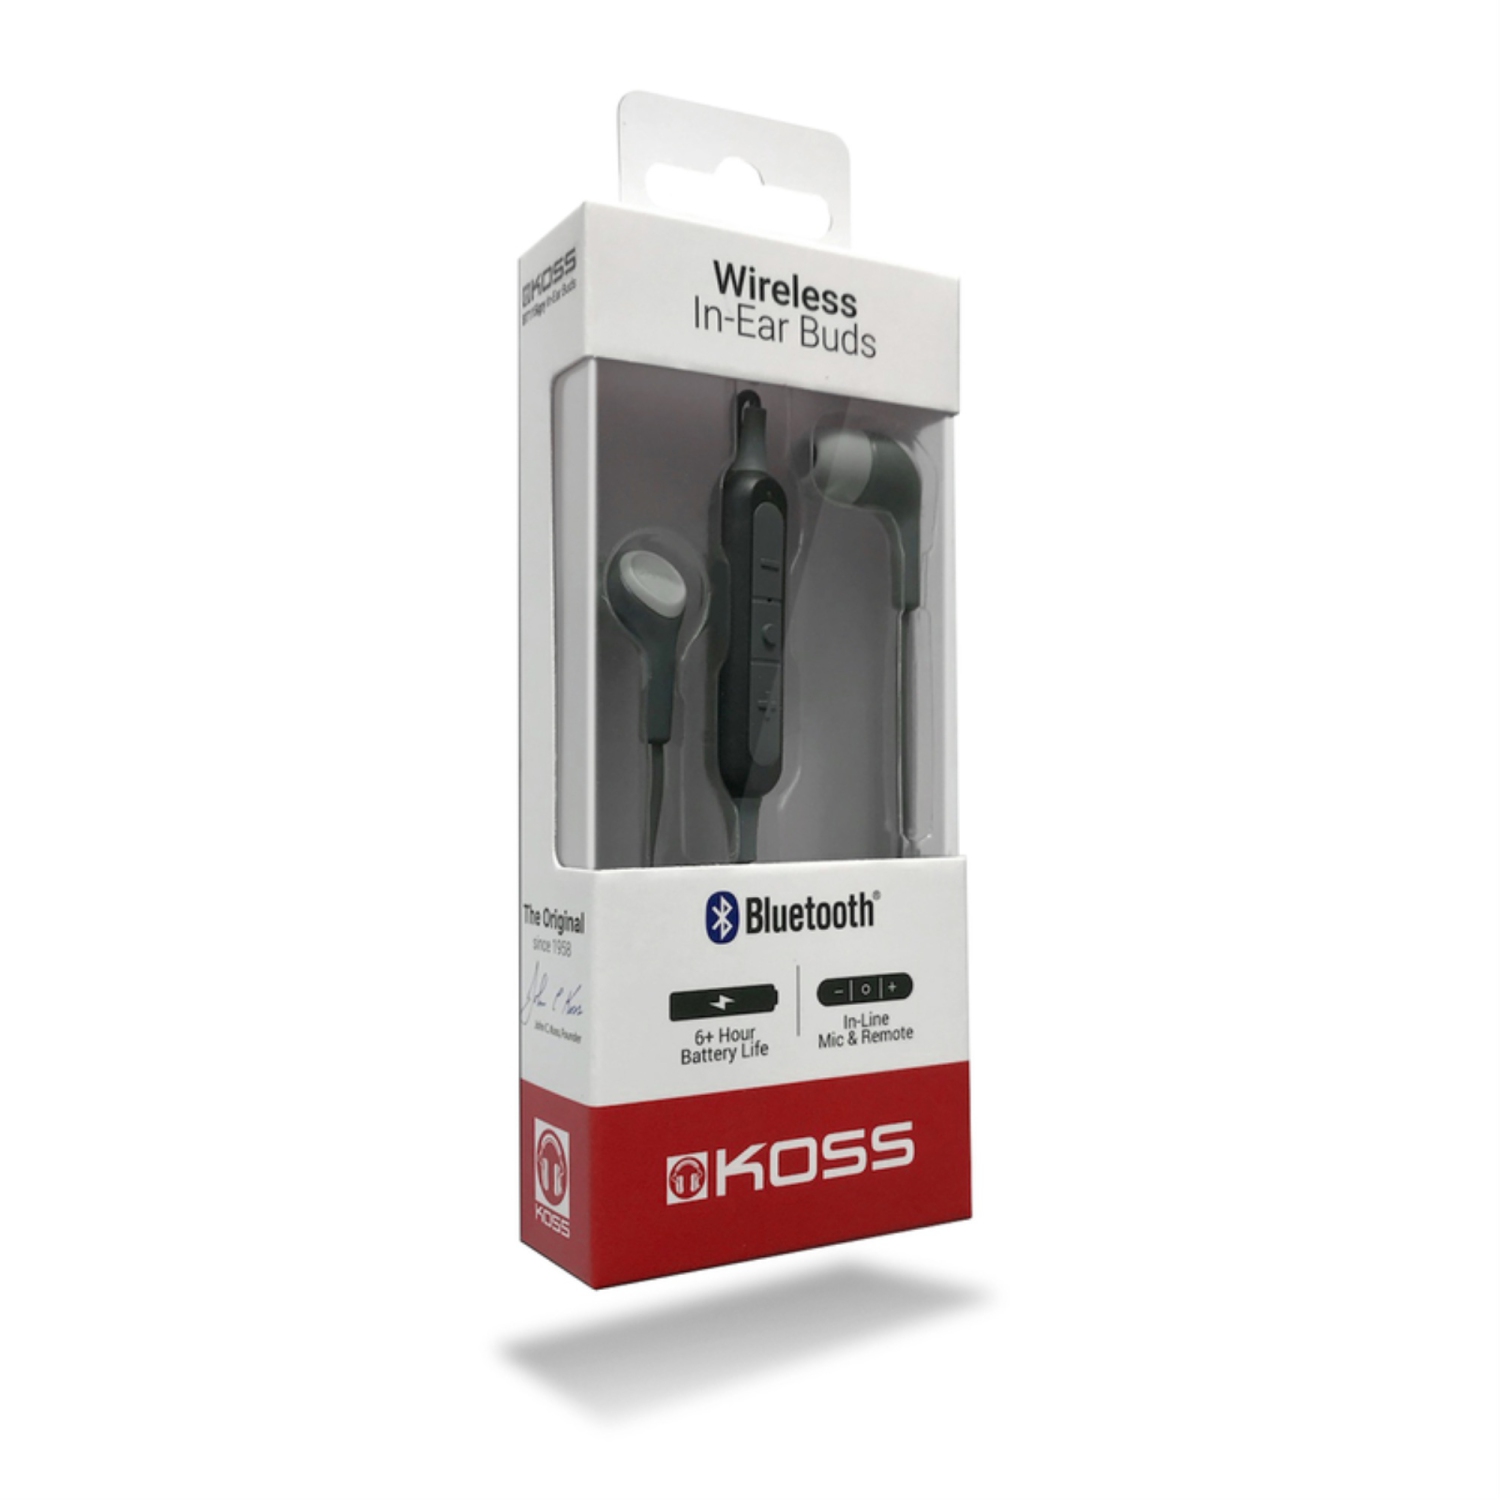 Koss BT115i Wireless Bluetooth in-Ear Buds | in-Line Microphone & Remote | Black & Grey | 6+ Hour Battery Life | Lightweight